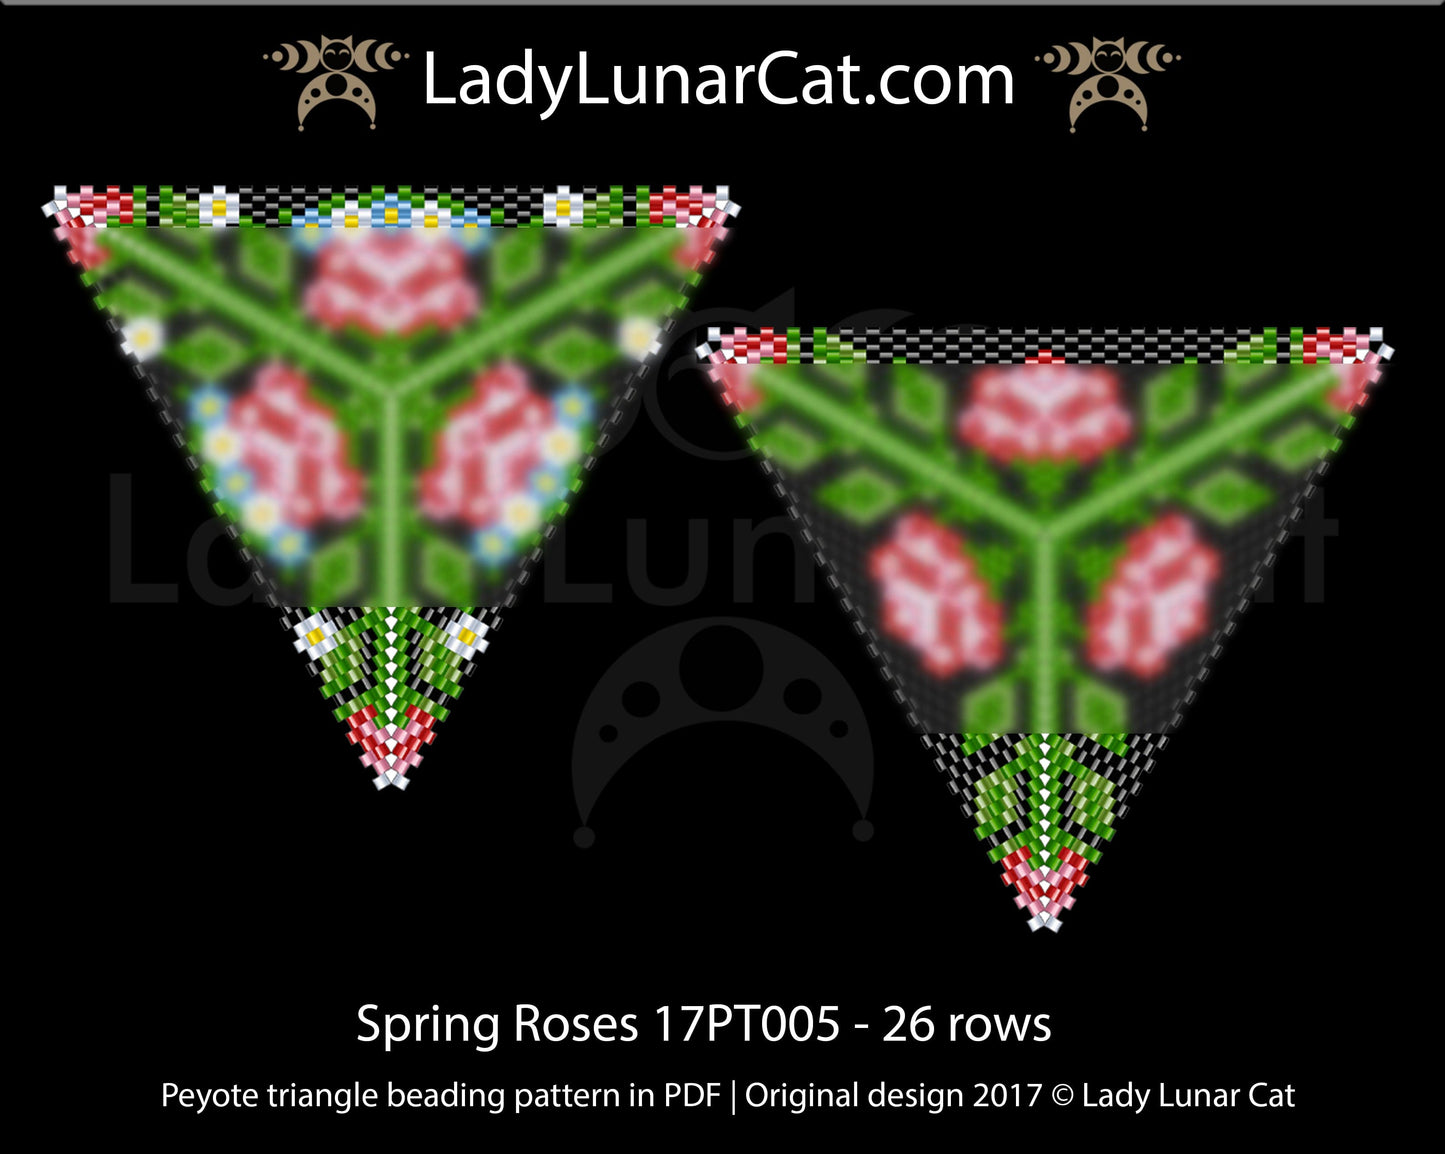 Copy of Peyote triangle pattern for beading Roses 16PT002 LadyLunarCat